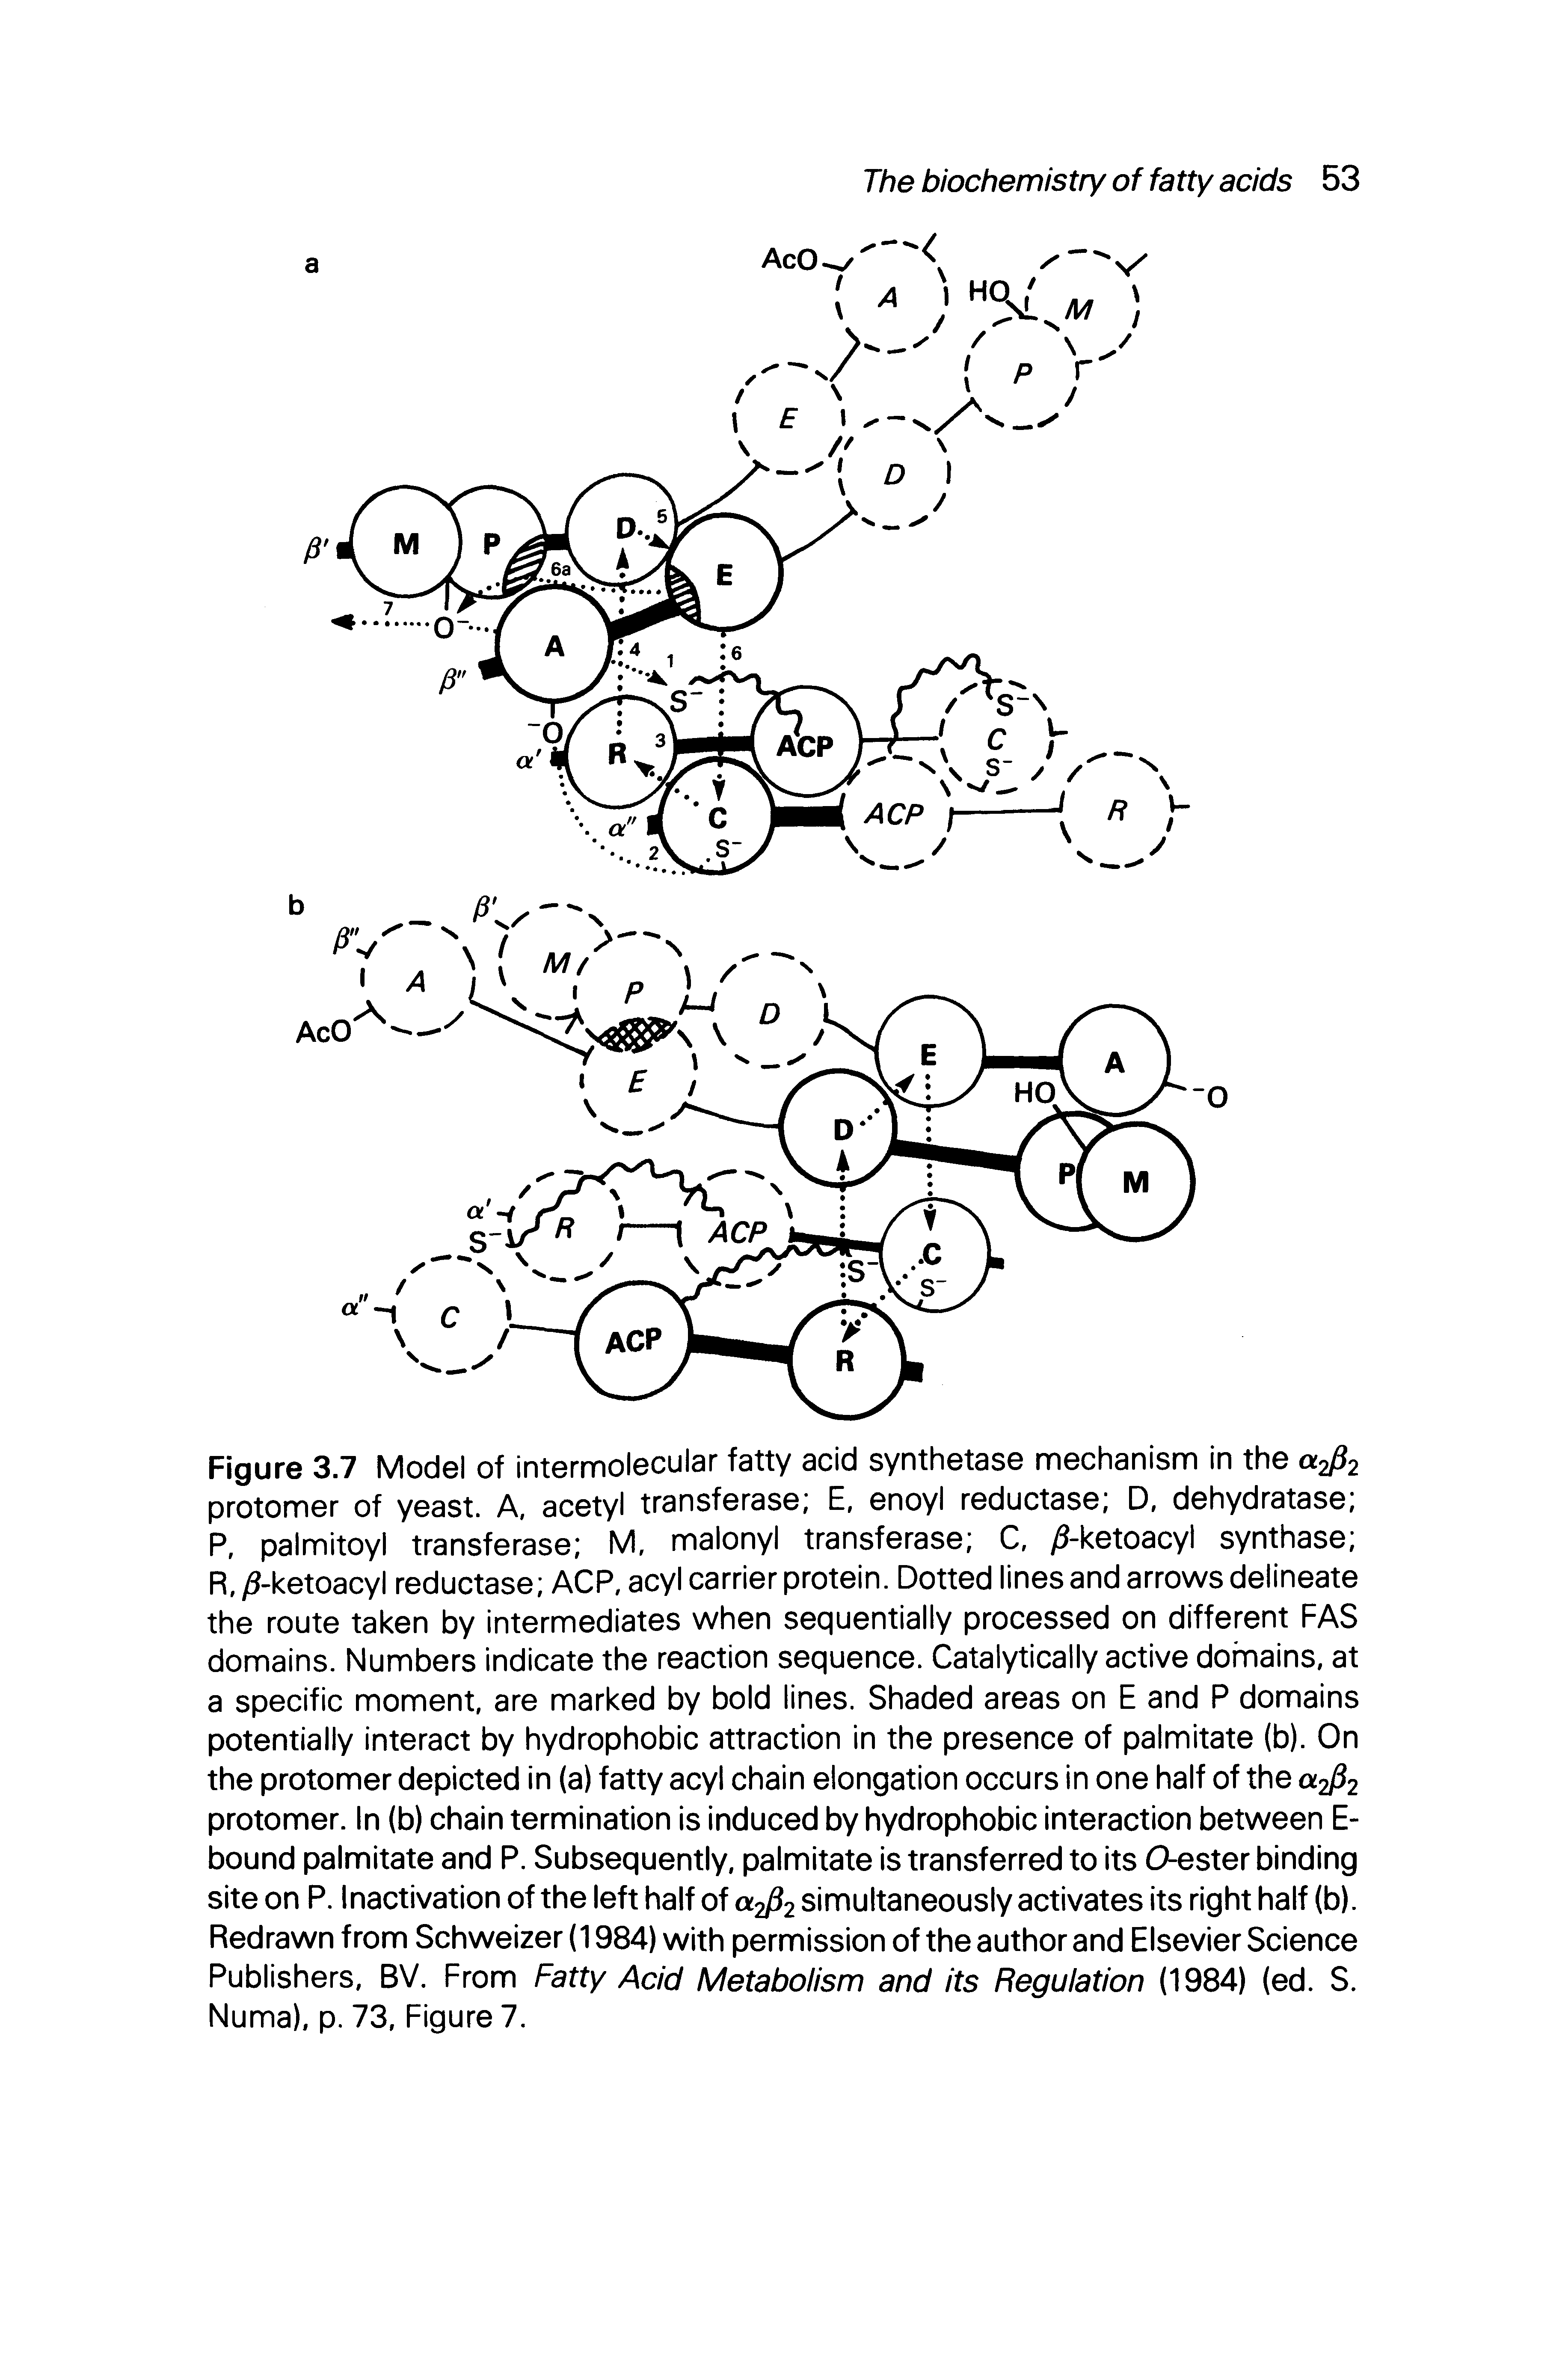 Figure 3.7 Model of intermolecular fatty acid synthetase mechanism in the a2 2 protomer of yeast. A, acetyl transferase E, enoyl reductase D, dehydratase P, palmitoyl transferase M, malonyl transferase C, 5-ketoacyl synthase R. )5-ketoacyl reductase ACP, acyl carrier protein. Dotted lines and arrows delineate the route taken by intermediates when sequentially processed on different FAS domains. Numbers indicate the reaction sequence. Catalytically active dohnains, at a specific moment, are marked by bold lines. Shaded areas on E and P domains potentially interact by hydrophobic attraction in the presence of palmitate (b). On the protomer depicted in (a) fatty acyl chain elongation occurs in one half of the a2 2 protomer. In (b) chain termination is induced by hydrophobic interaction between E> bound palmitate and P. Subsequently, palmitate Is transferred to Its O-ester binding site on P. Inactivation of the left half of simultaneously activates its right half (b). Redrawn from Schweizer (1984) with permission of the author and Elsevier Science Publishers, BV. From Fatty Acid Metabolism and its Regulation (1984) (ed. S. Numa), p. 73, Figure 7.